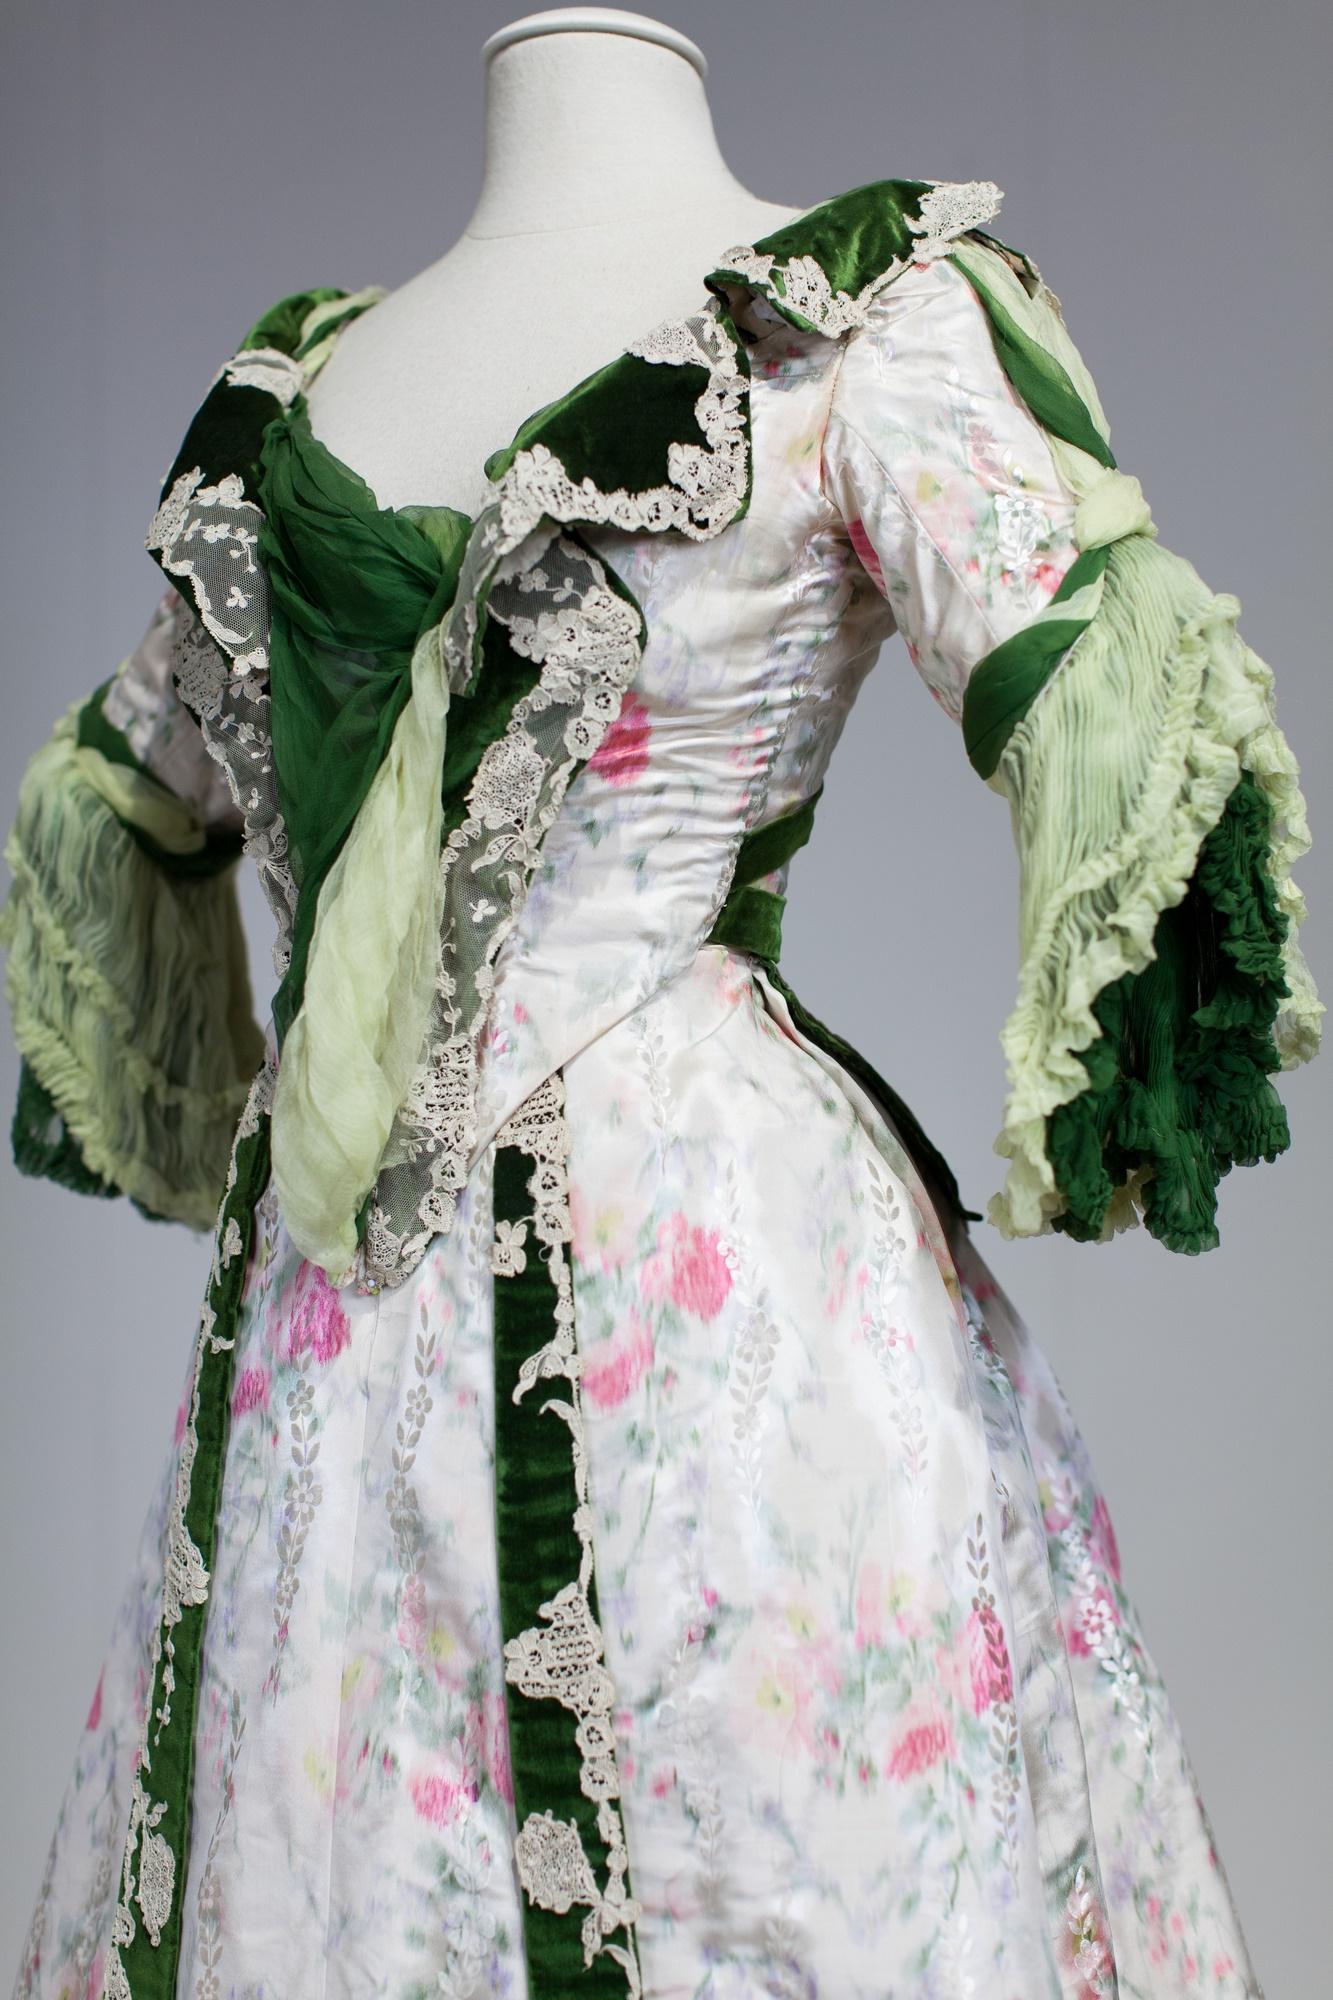 Women's Edwardian French Couture Ball-gown with furbelows on Chiné Silk Circa 1900